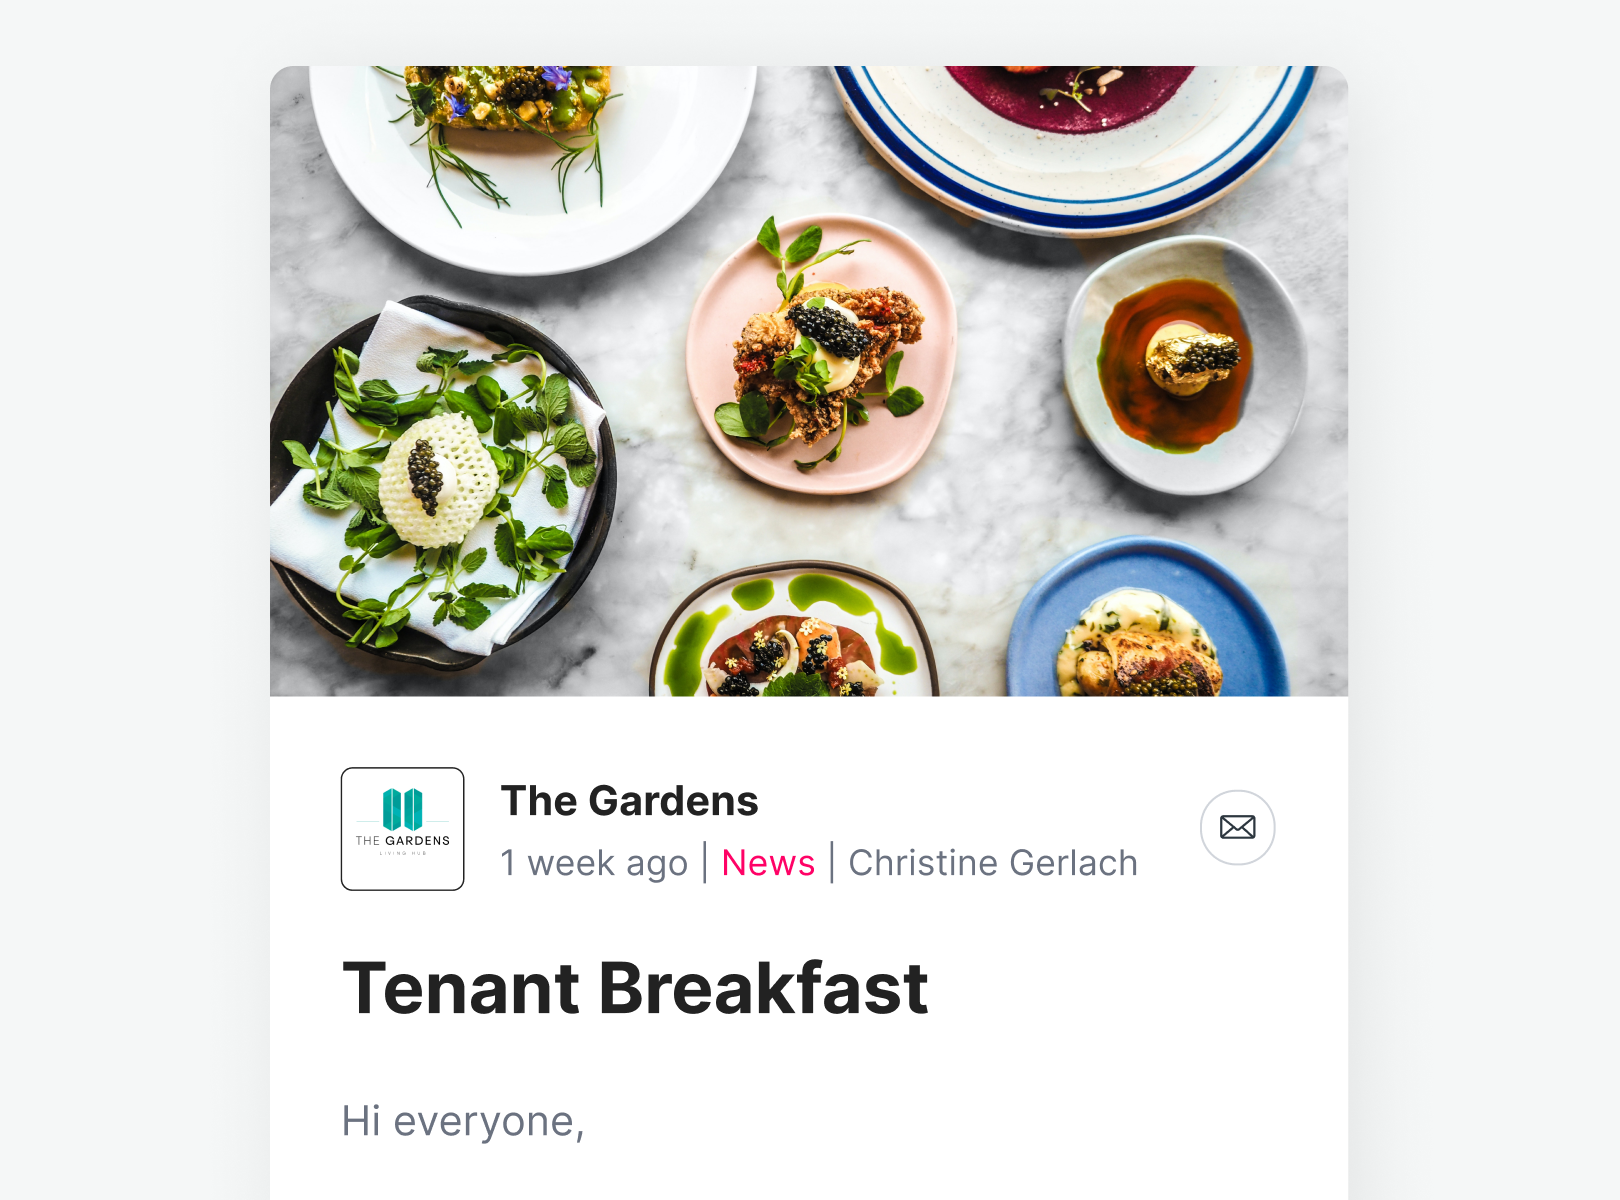 A message on Chainels about a tenant breakfast.